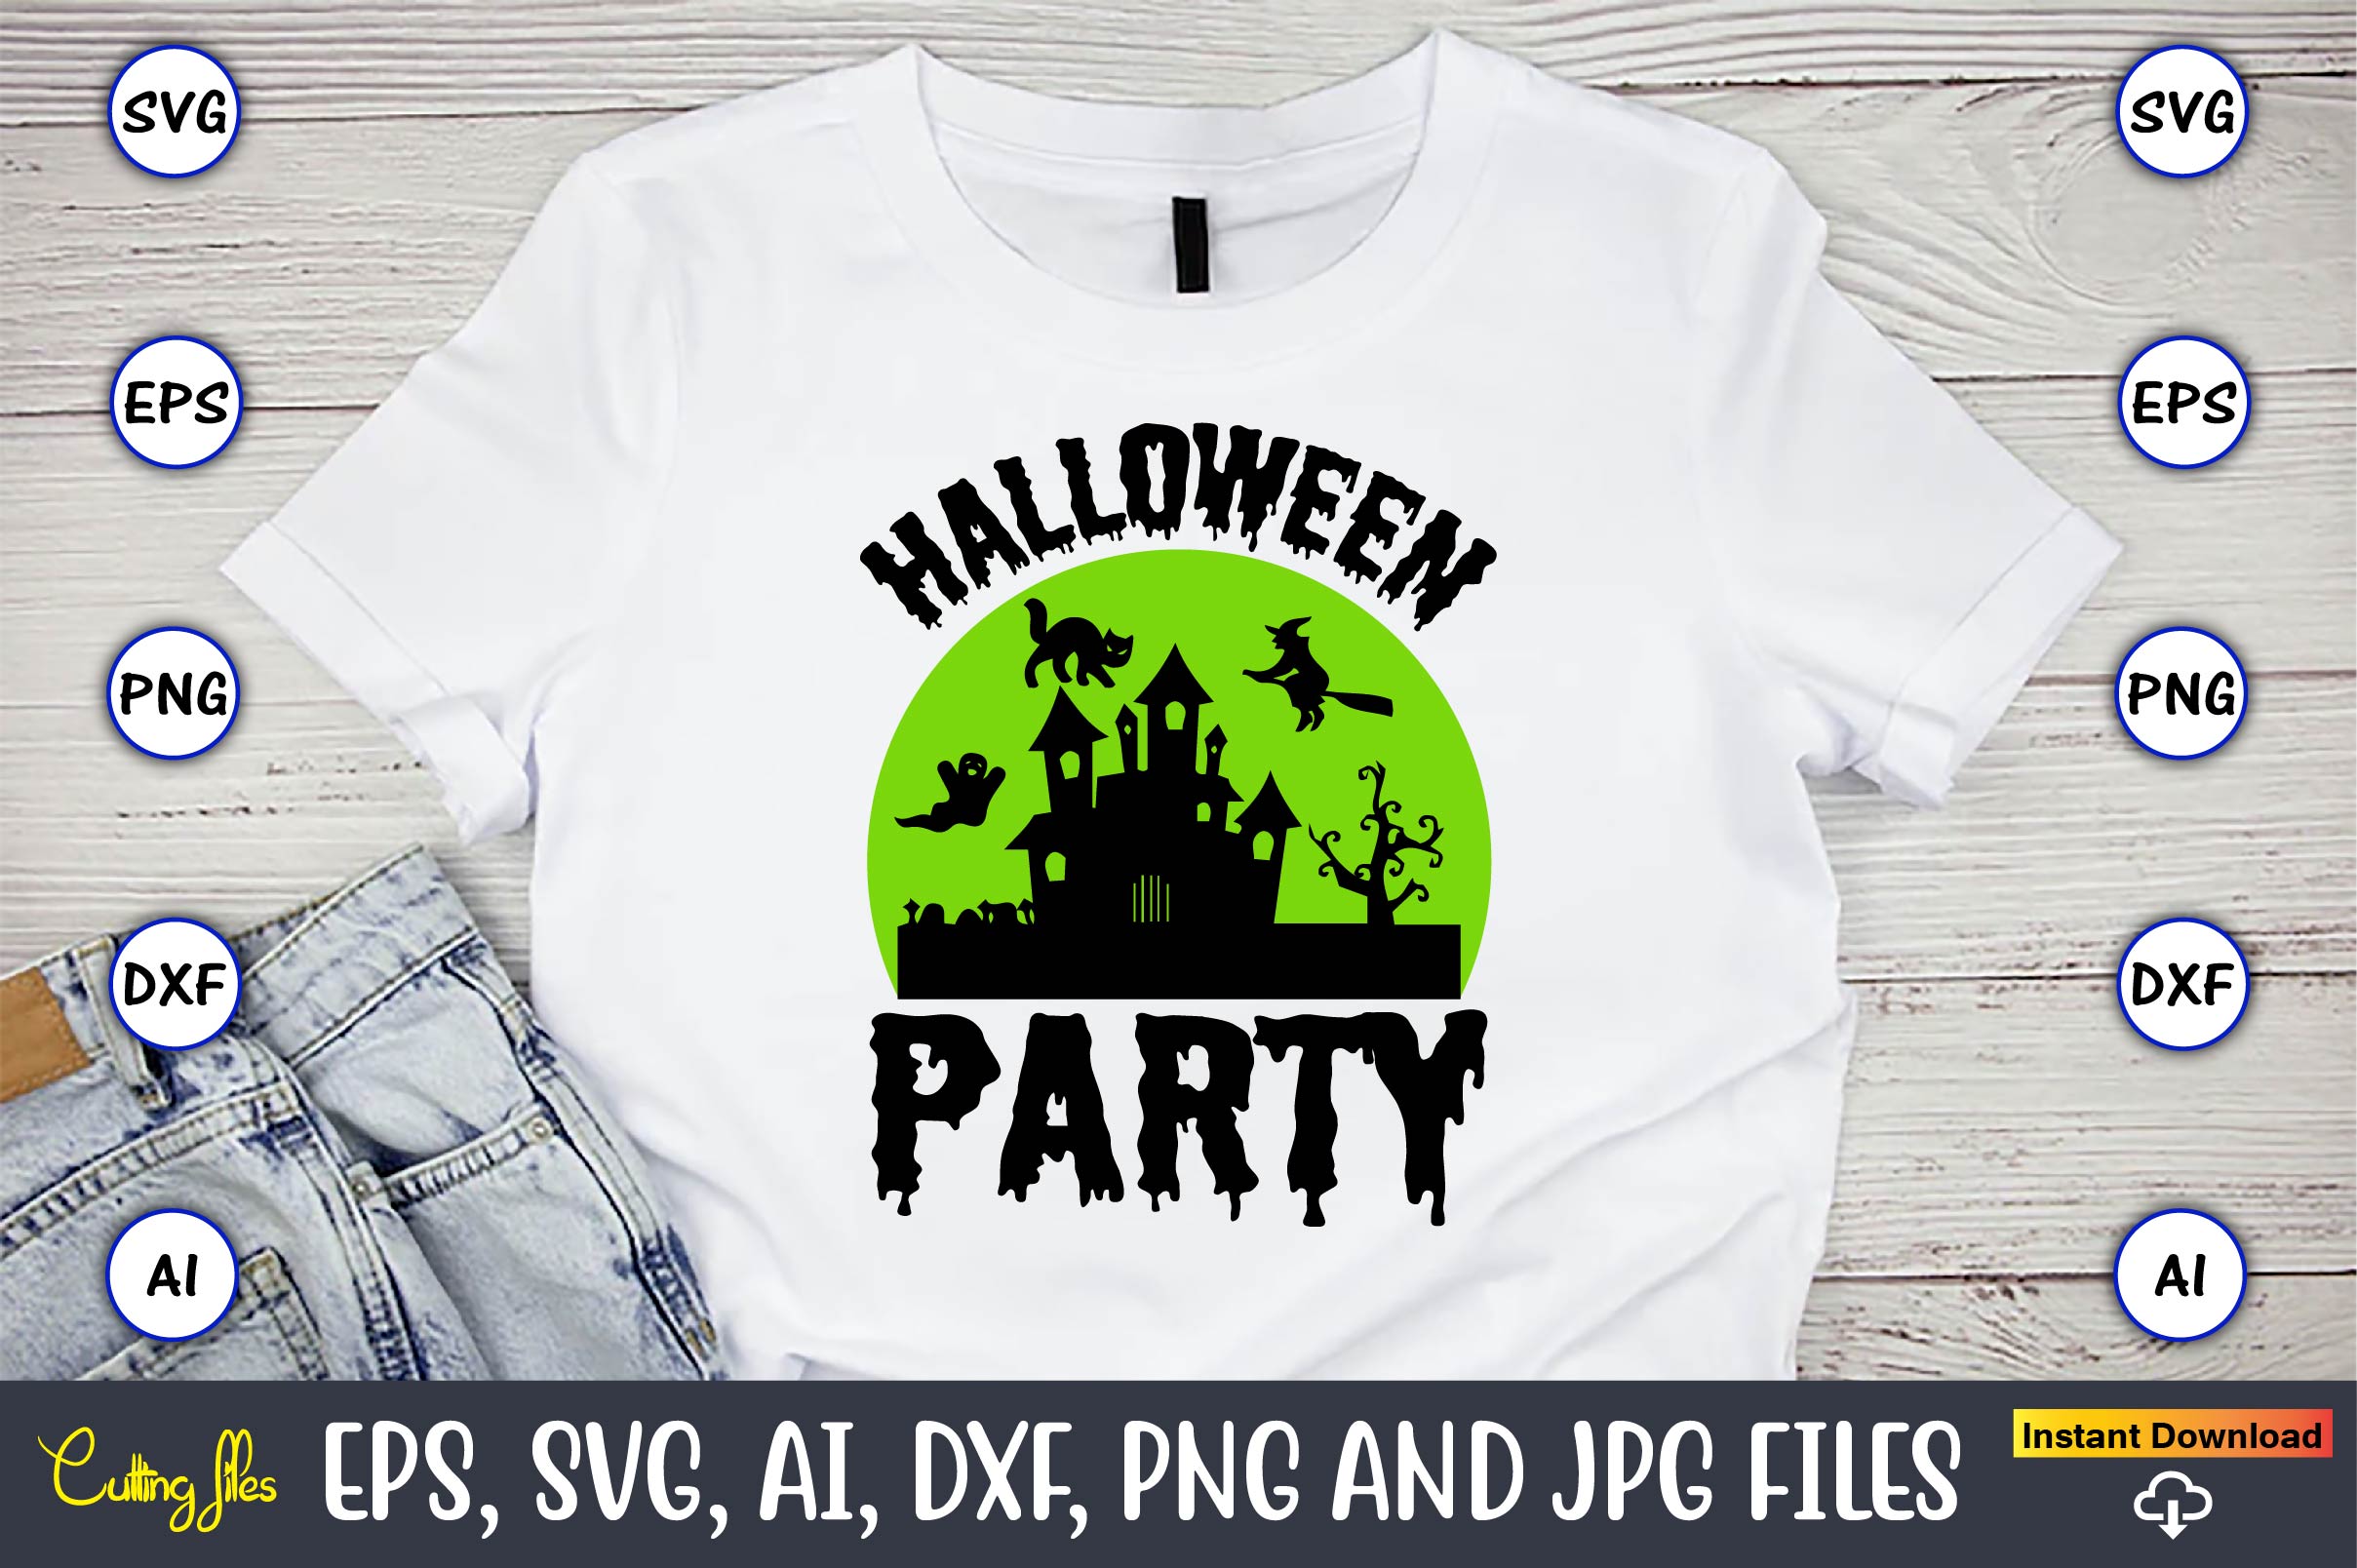 Image of a white t-shirt with a beautiful print on the theme of halloween.